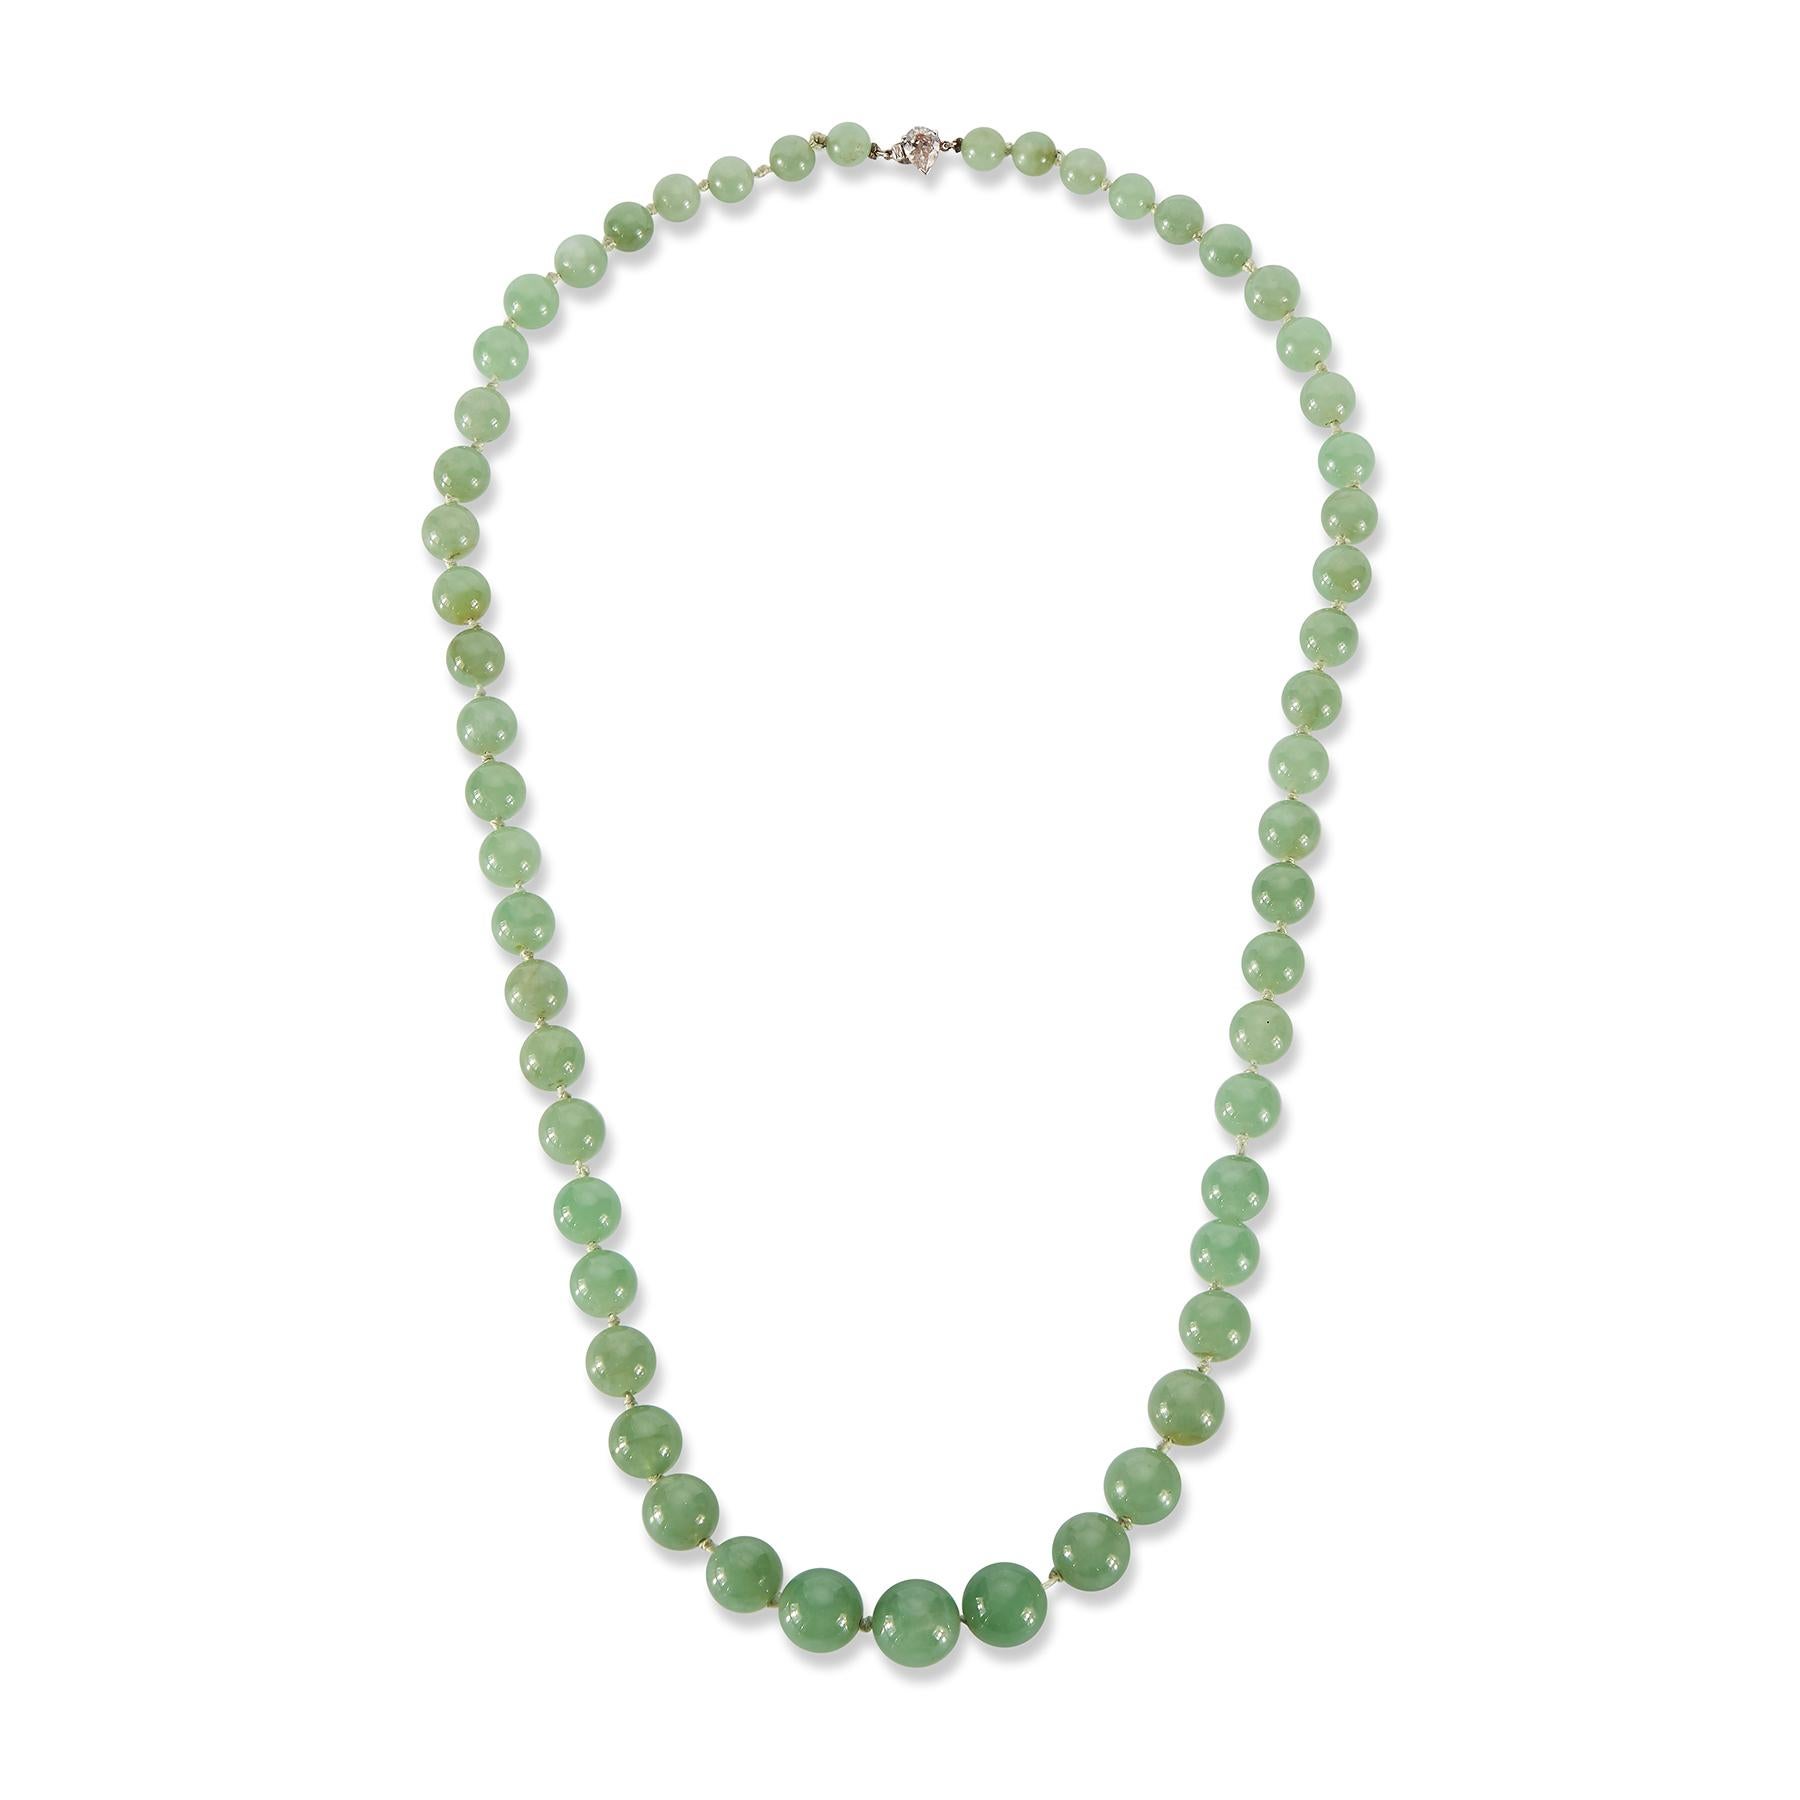 Certified Natural Jadeite Jade Bead Necklace

This necklace is set with translucent round green beads including a pear shape diamond clasp.

With GIA certificate stating the jade is natural, with no treatment.

Length: approximately 25 inches